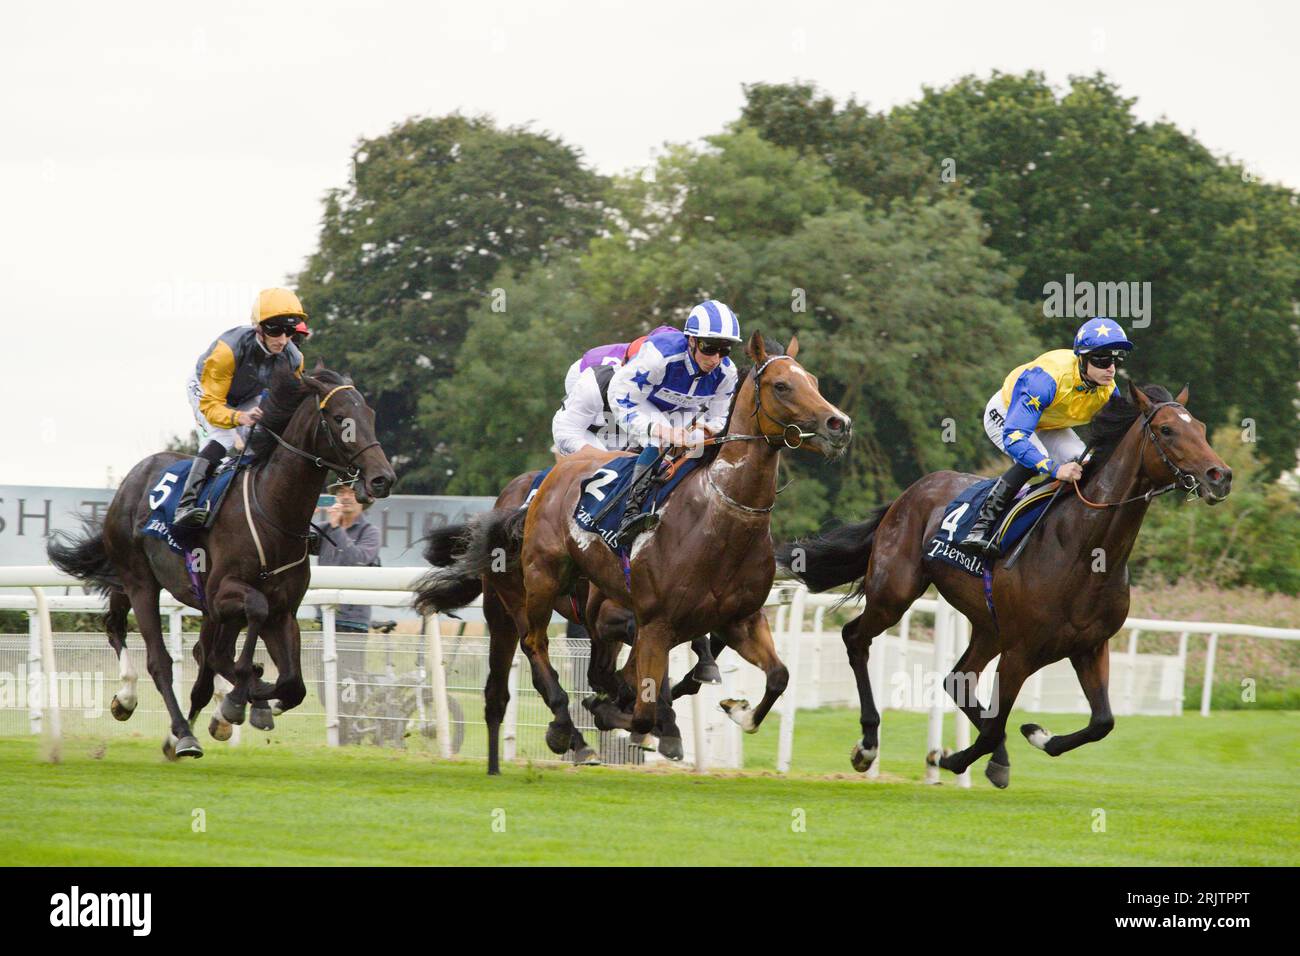 York, UK. 23rd Aug, 2023. Race horses and their jockeys galloping from the start during the Tattersalls Acomb Stakes at York Racecourse. Credit: Ed Clews/Alamy Live News. Stock Photo